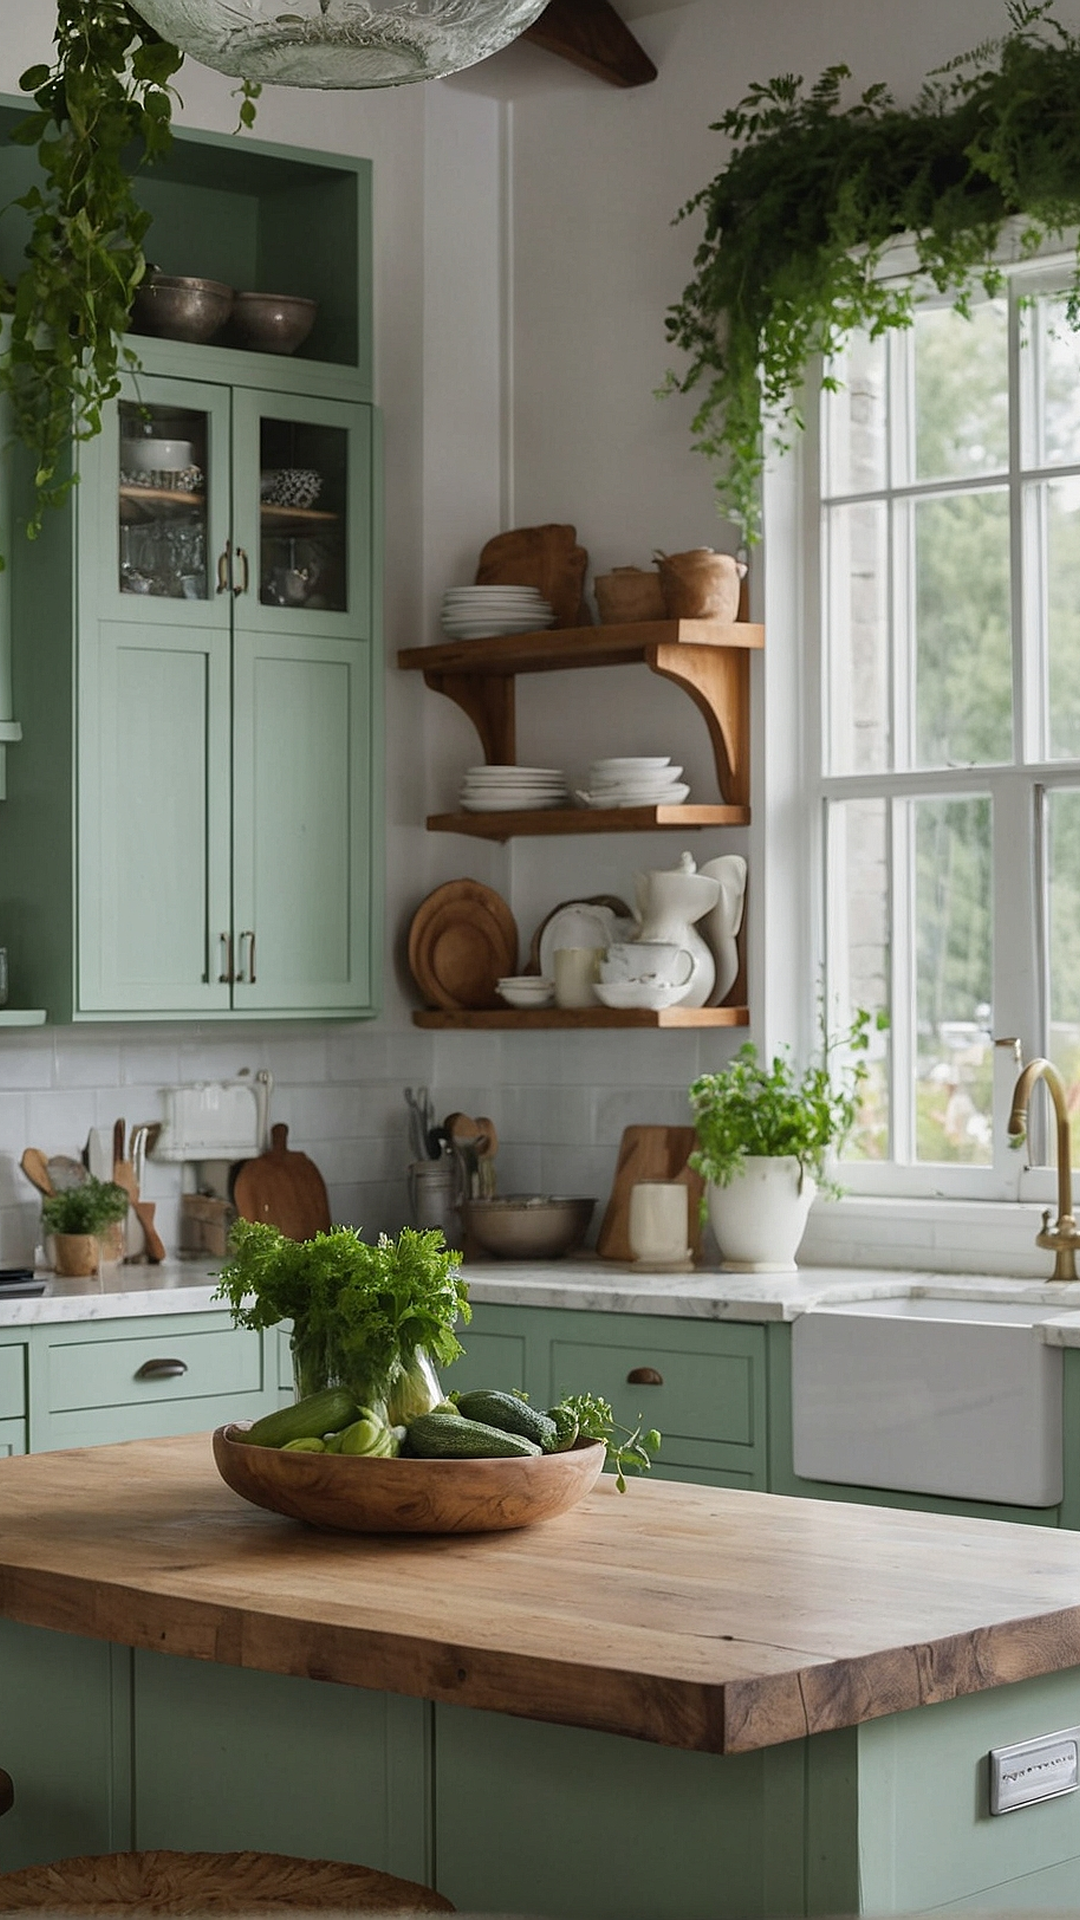 Tranquility at Home: Green Kitchen Ideals